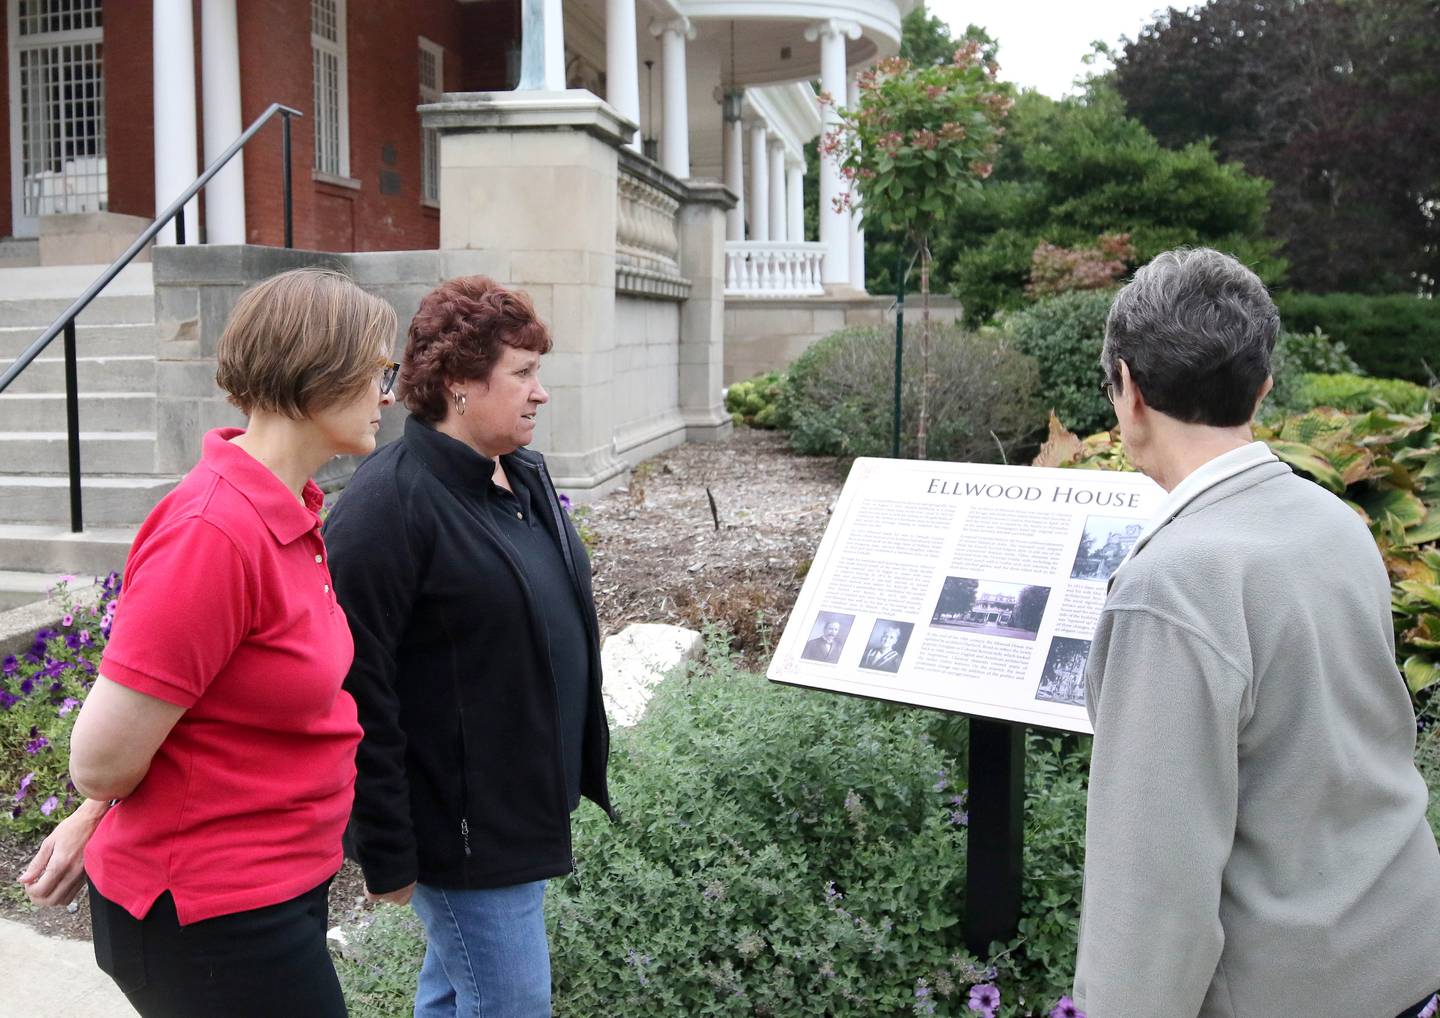 Sherrill Morris (left) from DeKalb and Diane Handlen, get a tour the grounds of the Elwood House in DeKalb from volunteer docent Nancy Leonard (right) Friday, Sept. 23, 2022, during Handlen's visit to the area from the state of Maine. Morris and Handlen have been pen pals since the 1970's and recently met each other in person for the first time.